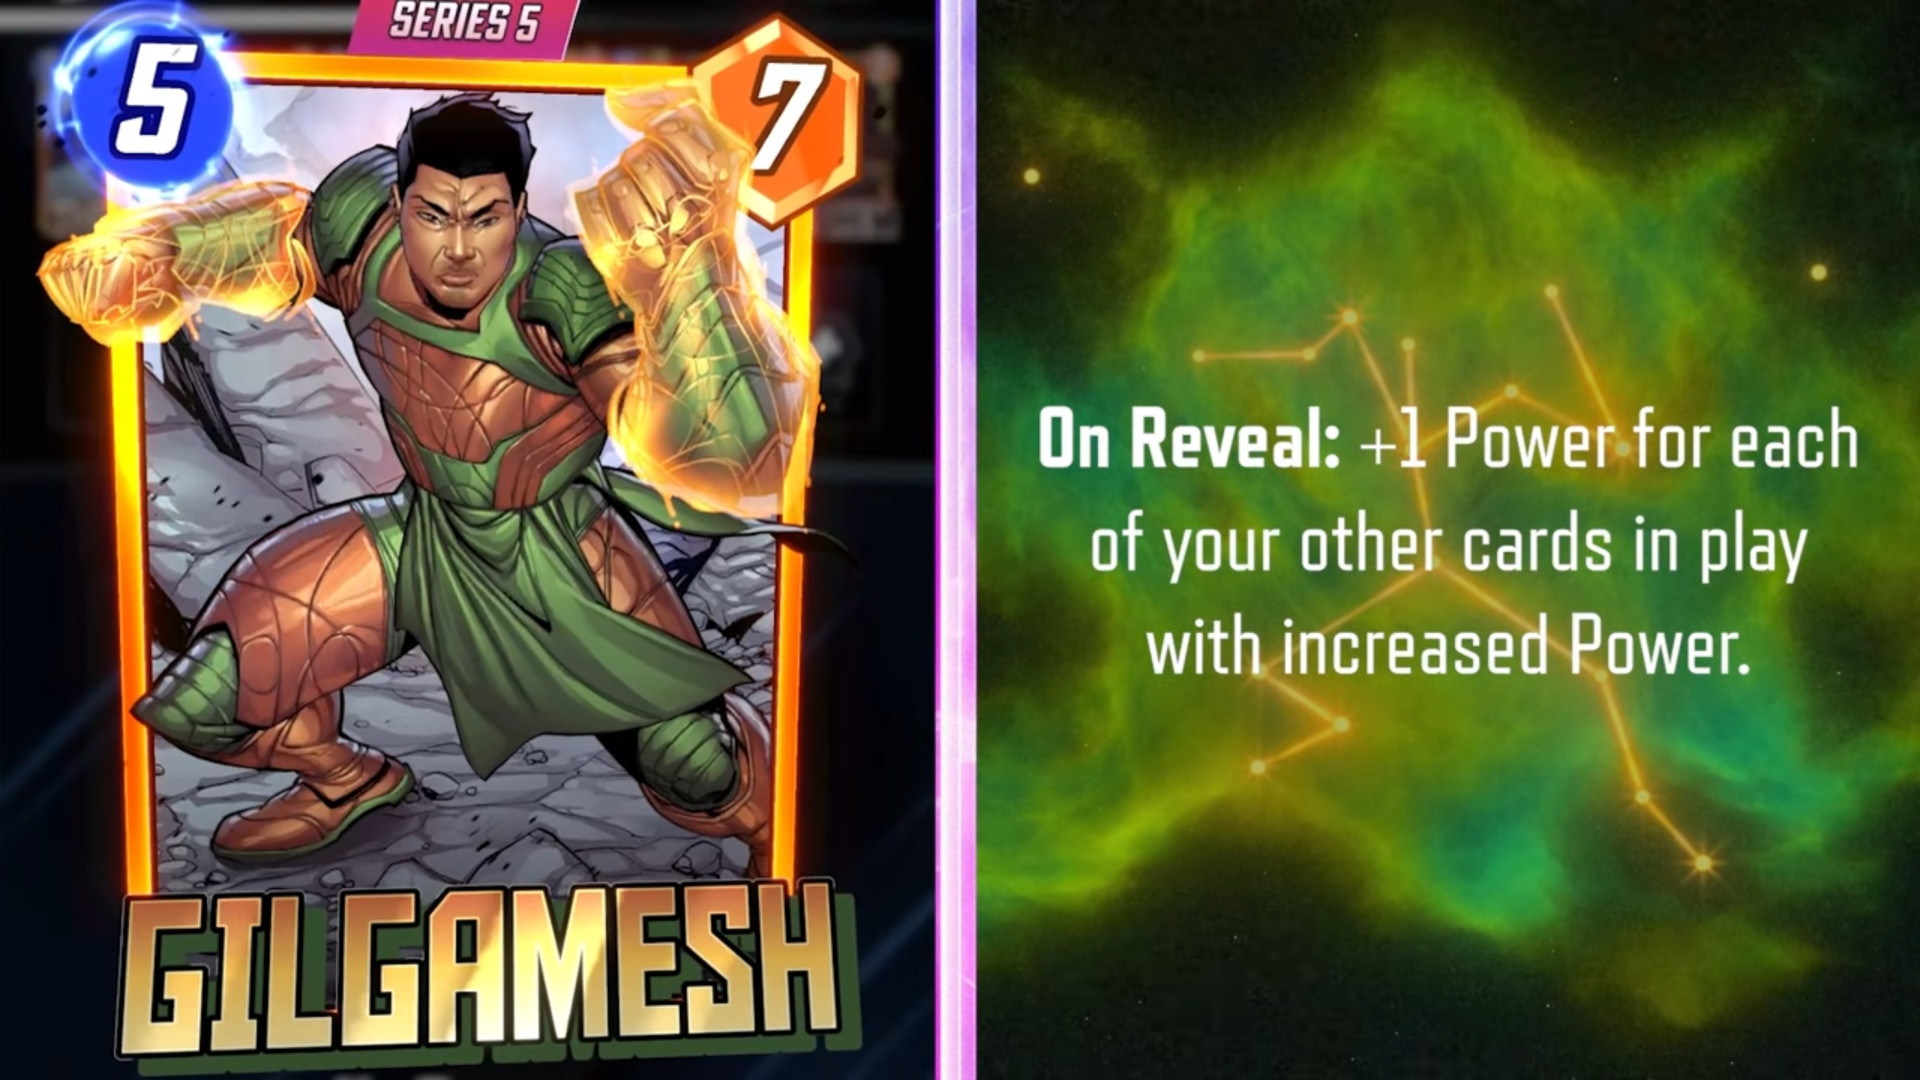 gilgamesh card art and in-game text marvel snap